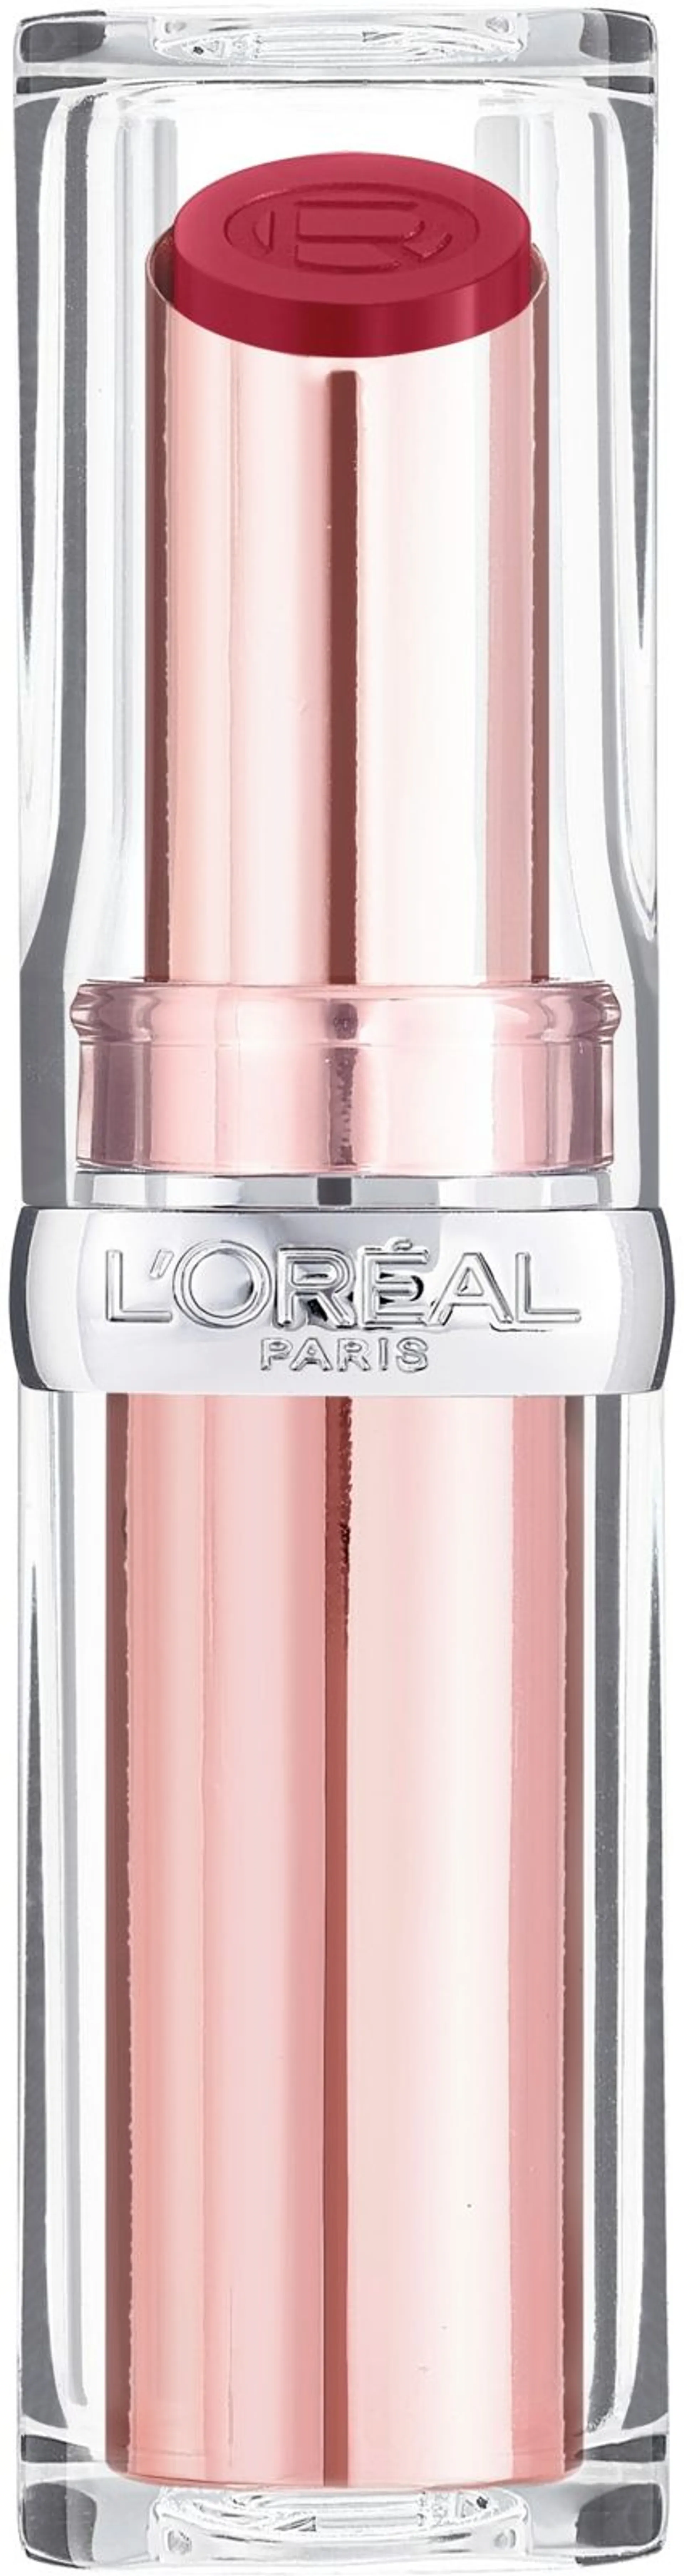 L'Oréal Paris Glow Paradise Balm-in-Lipstick 353 Mulberry Ecstatic huulipuna 3,8 g - 353 Mulberry Ecstatic - 2